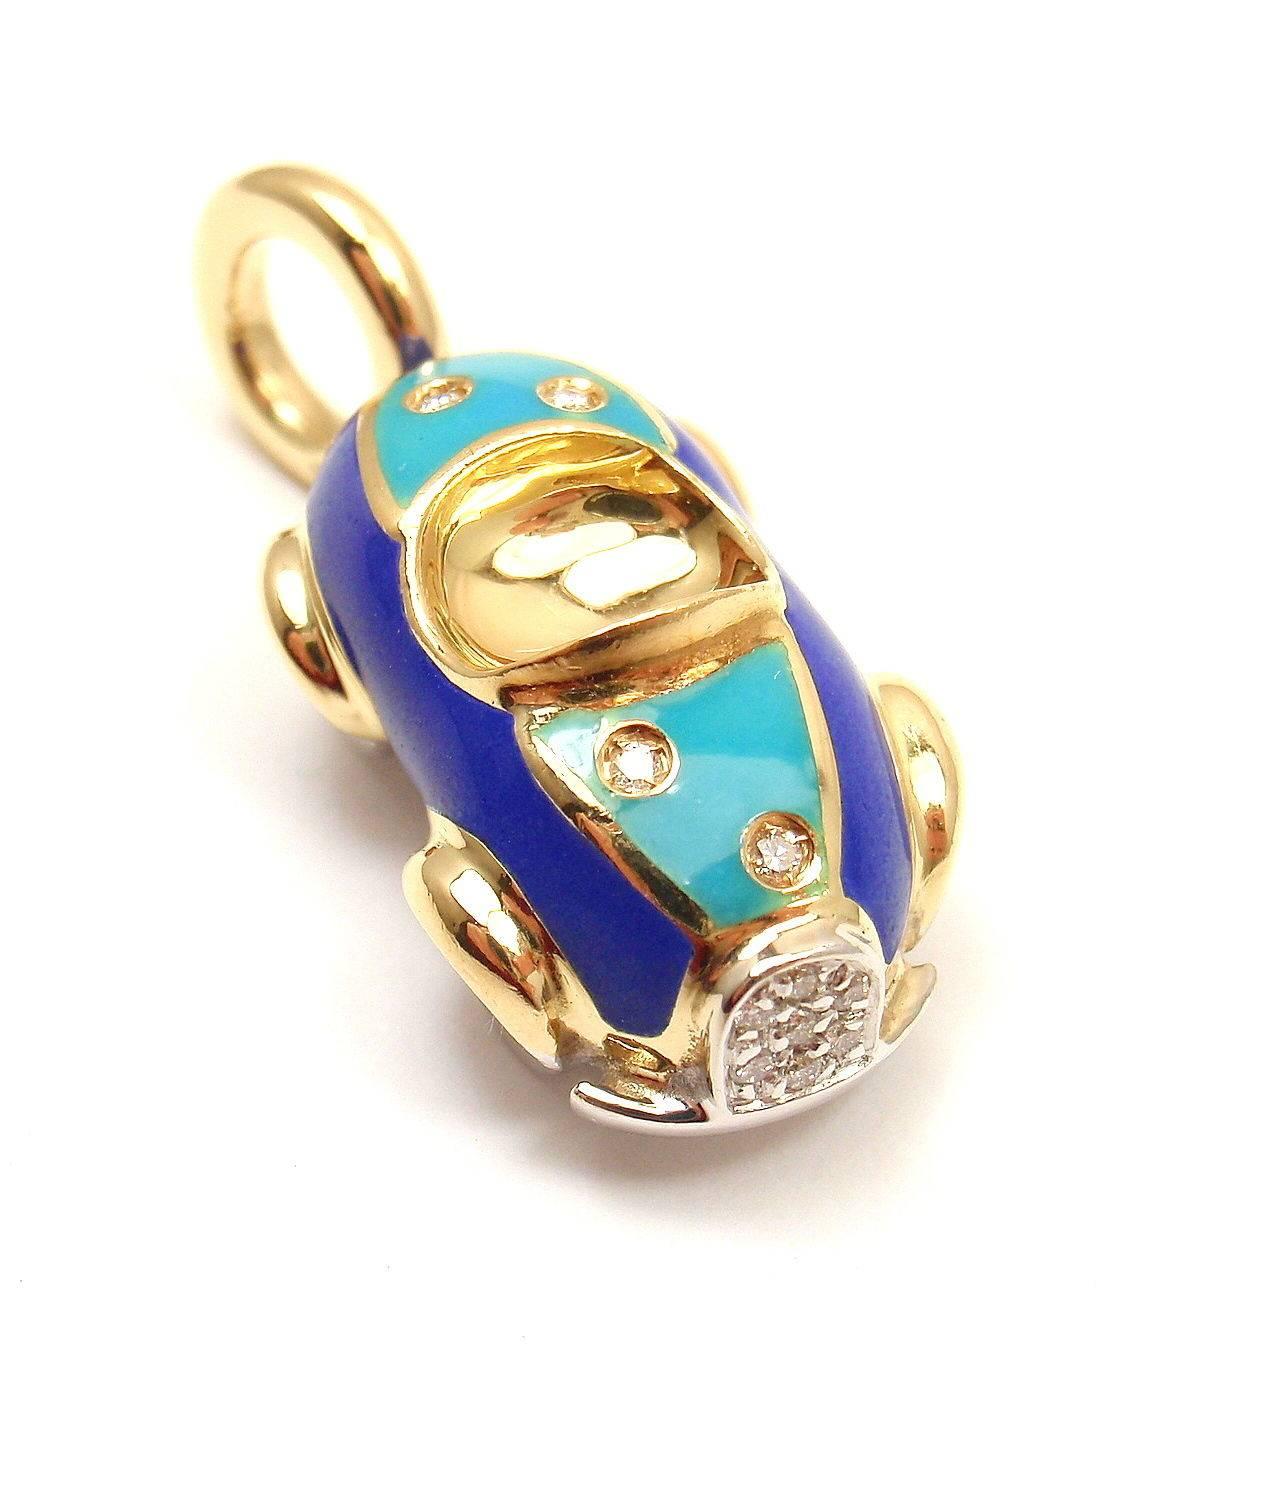 18k Yellow Gold Diamond Sapphire Car Pendant Charm by Aaron Basha. 
With Diamonds (approx .05 ctw) and cabochon Sapphires on wheels.

Retail Price: $4,200

Details: 
Weight: 7 grams
Measurements: 1 inch long x .45 inches thick
Stamped Hallmarks: AB